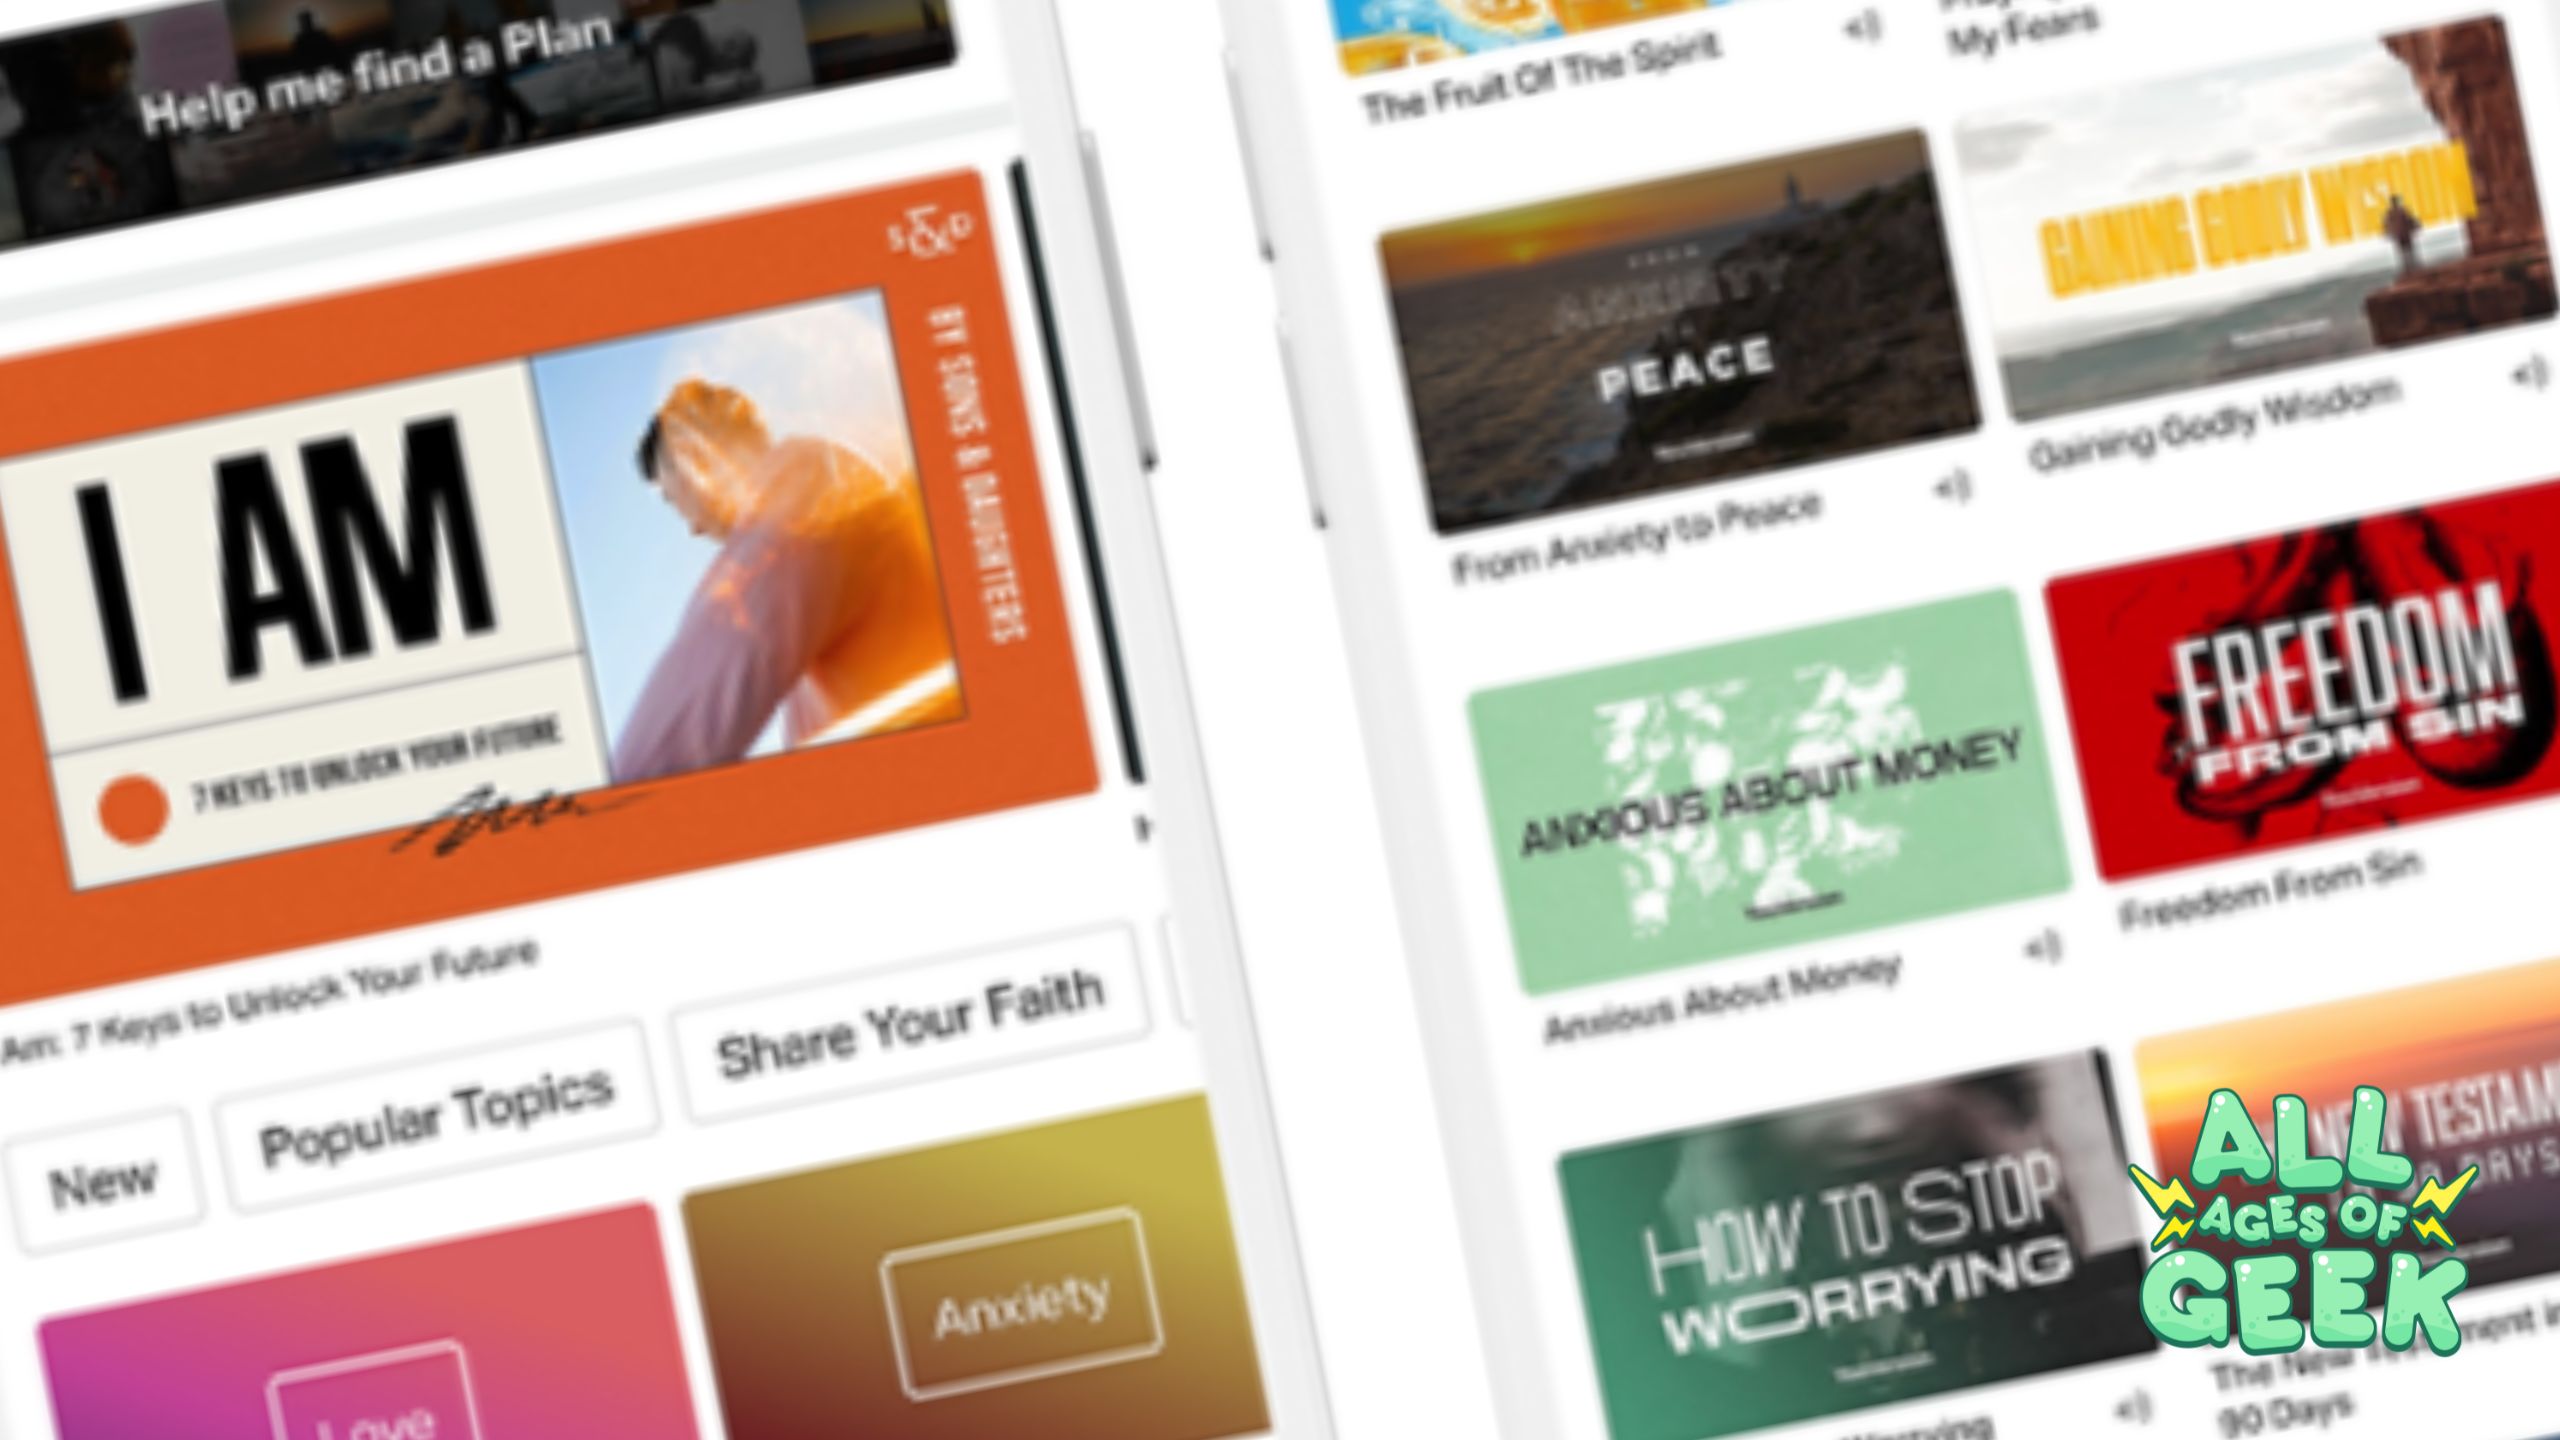 Looking for Bible Apps? We’ve Got You Covered